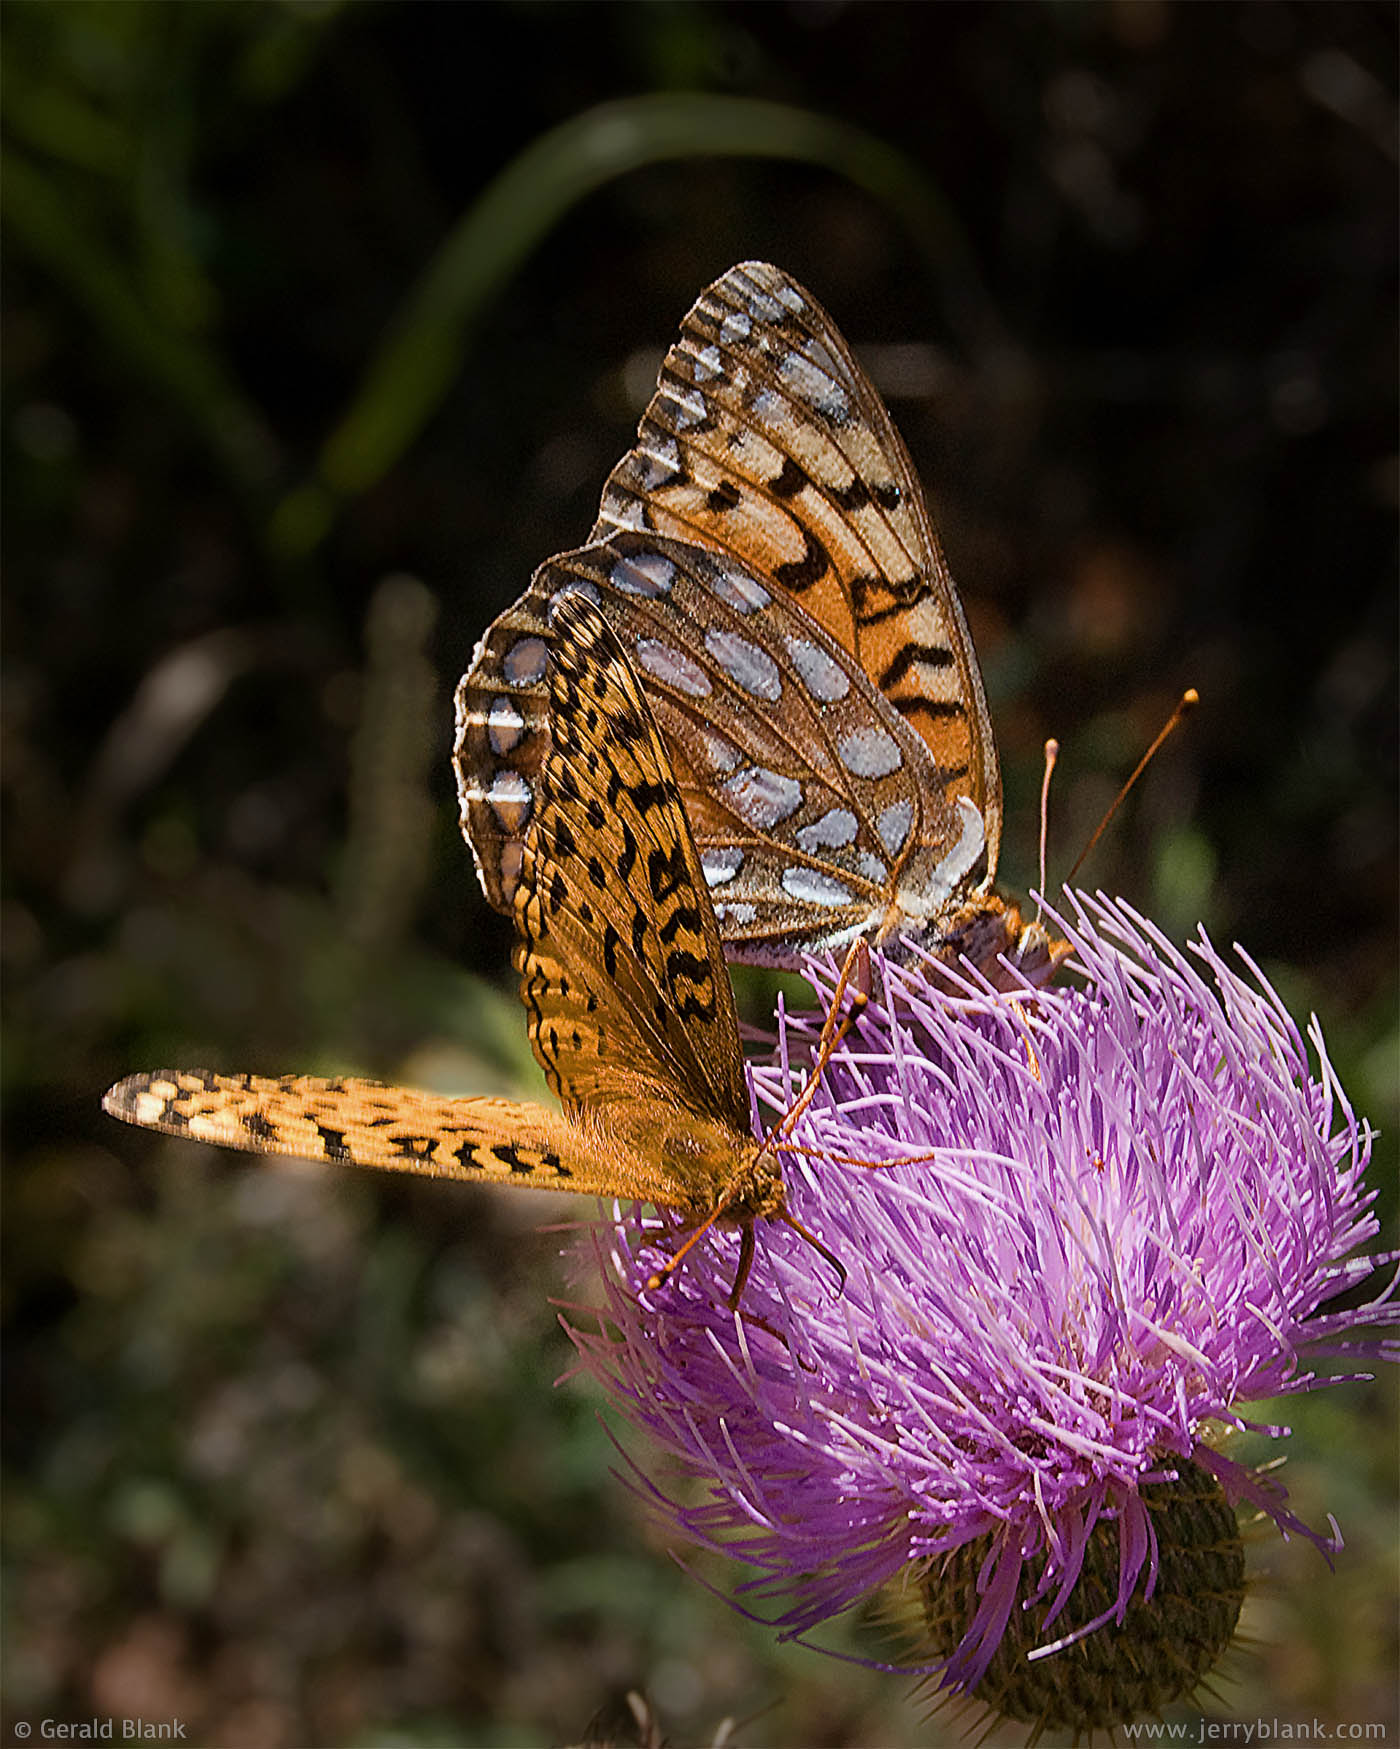 #01950 - Butterflies: His ’n’ hers thistle, Dunn County, North Dakota - photo by Jerry Blank